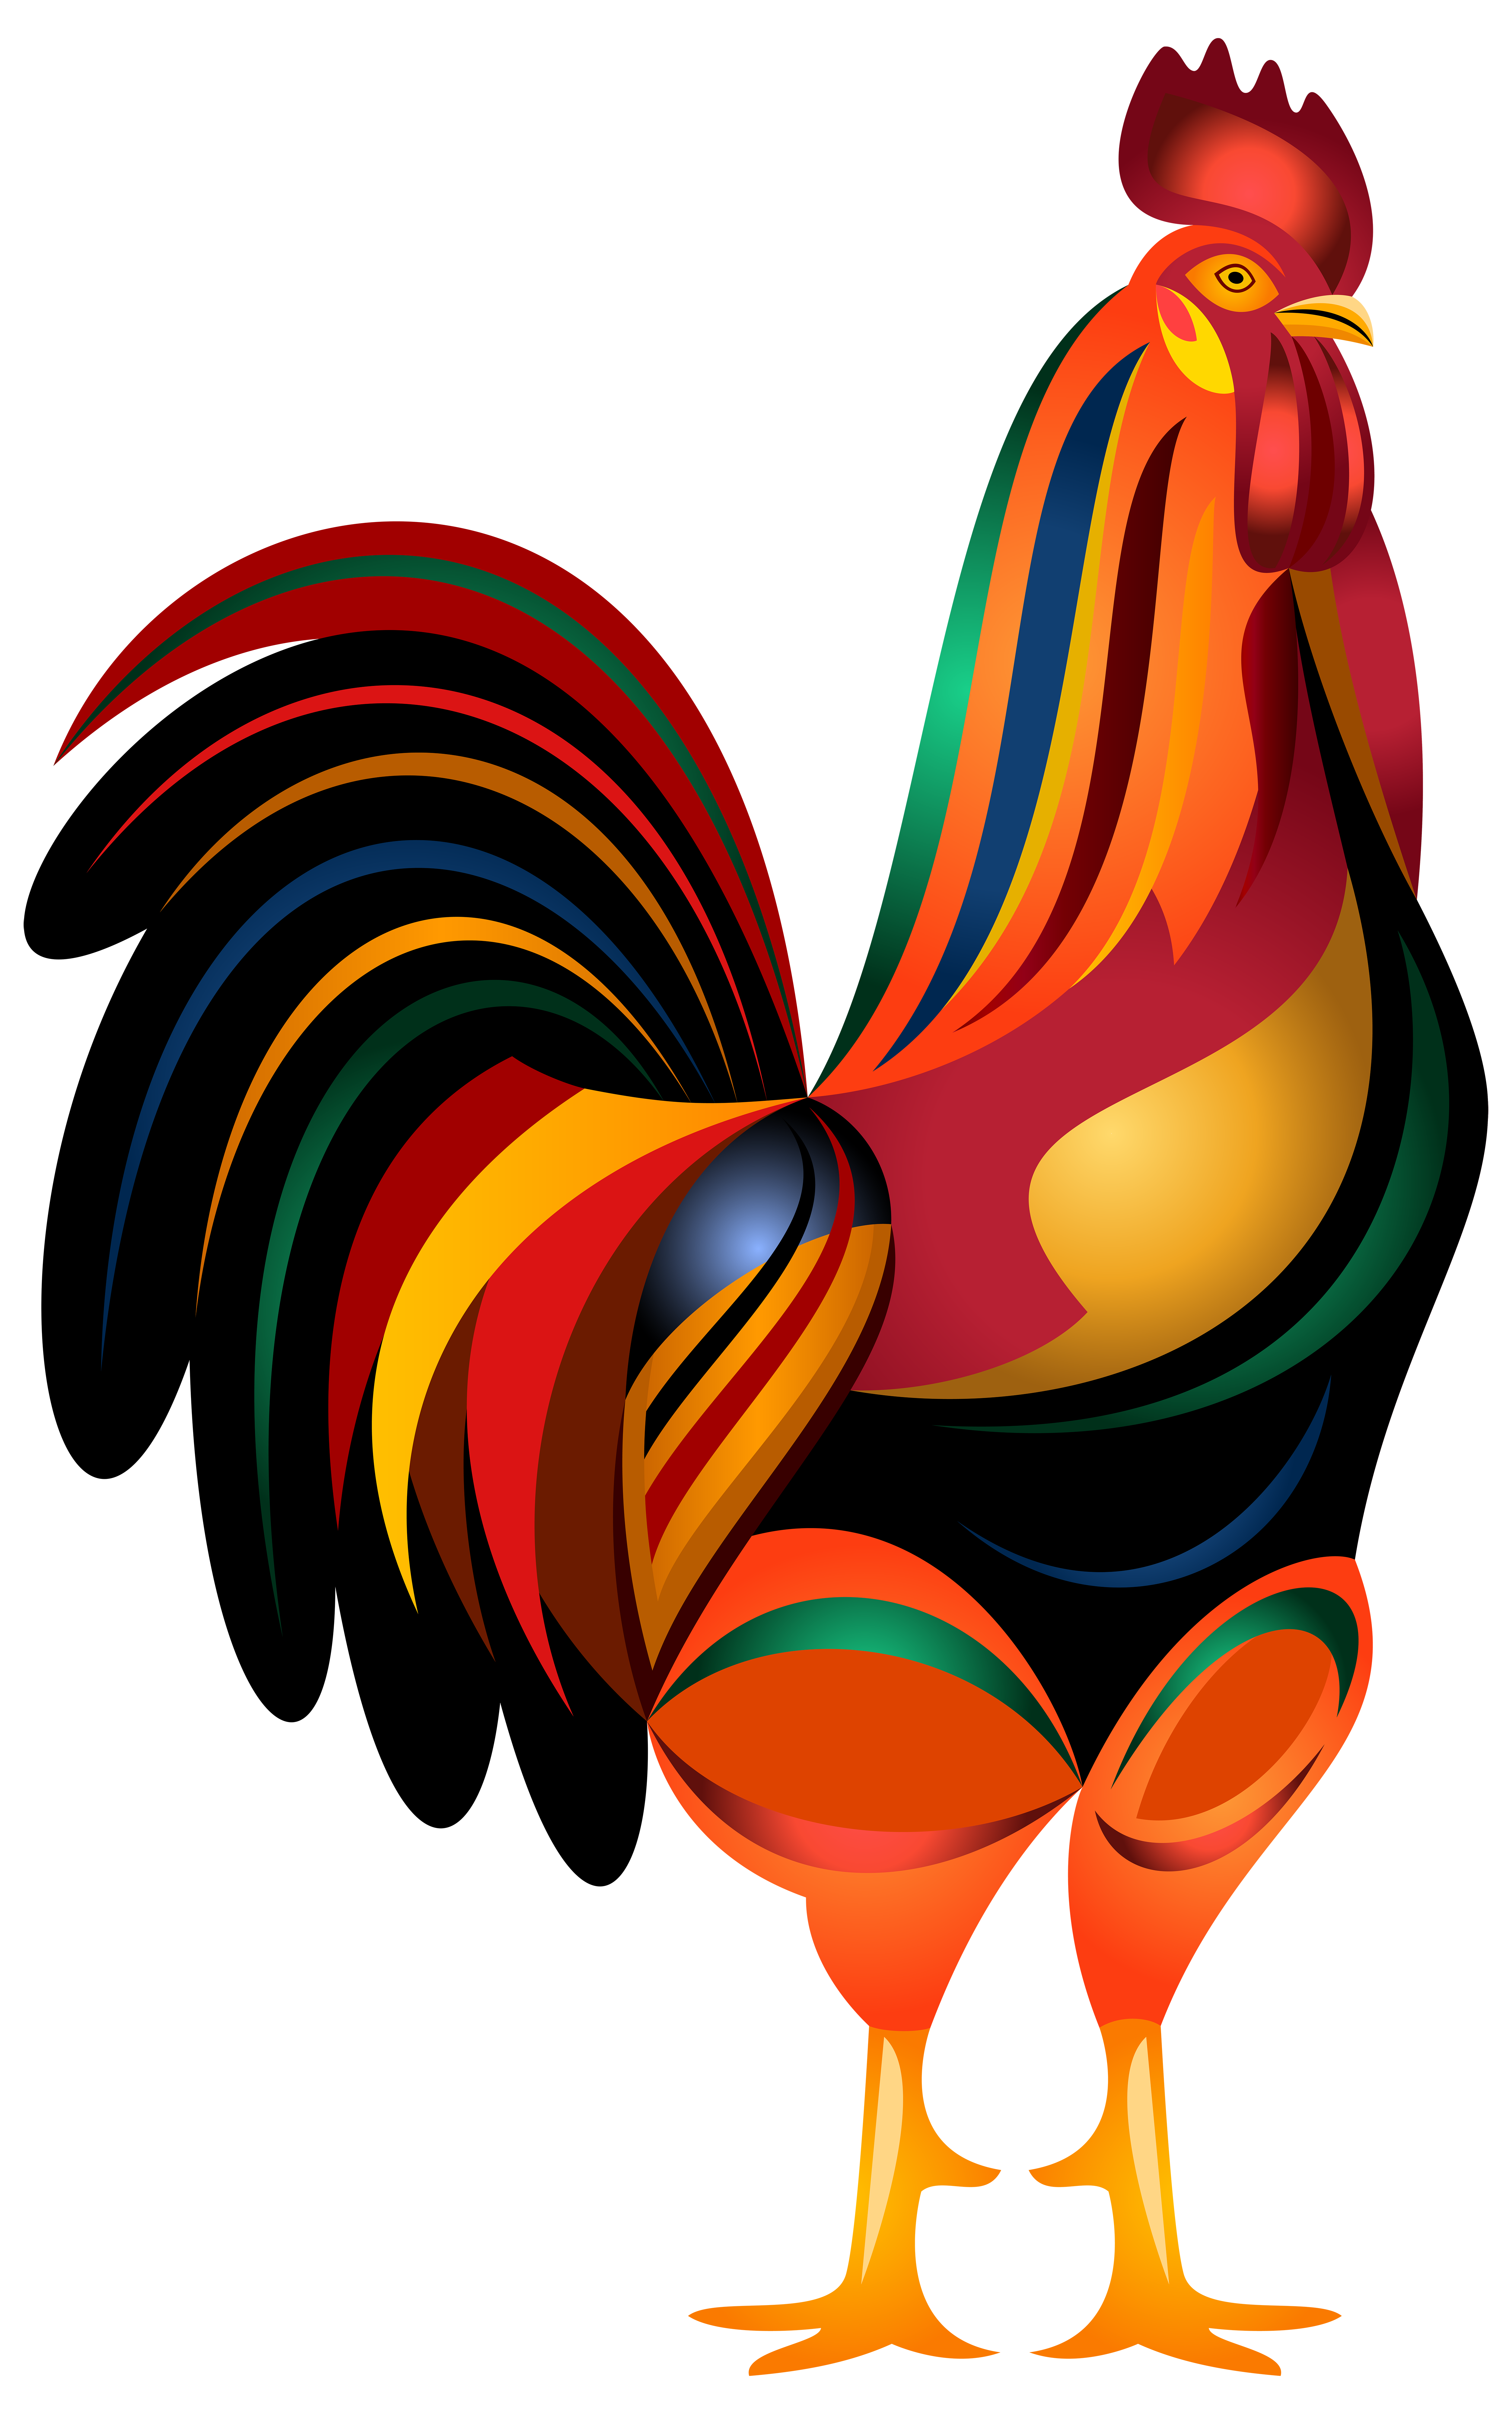 Rooster PNG Transparent Clip Art Image | Gallery Yopriceville ...